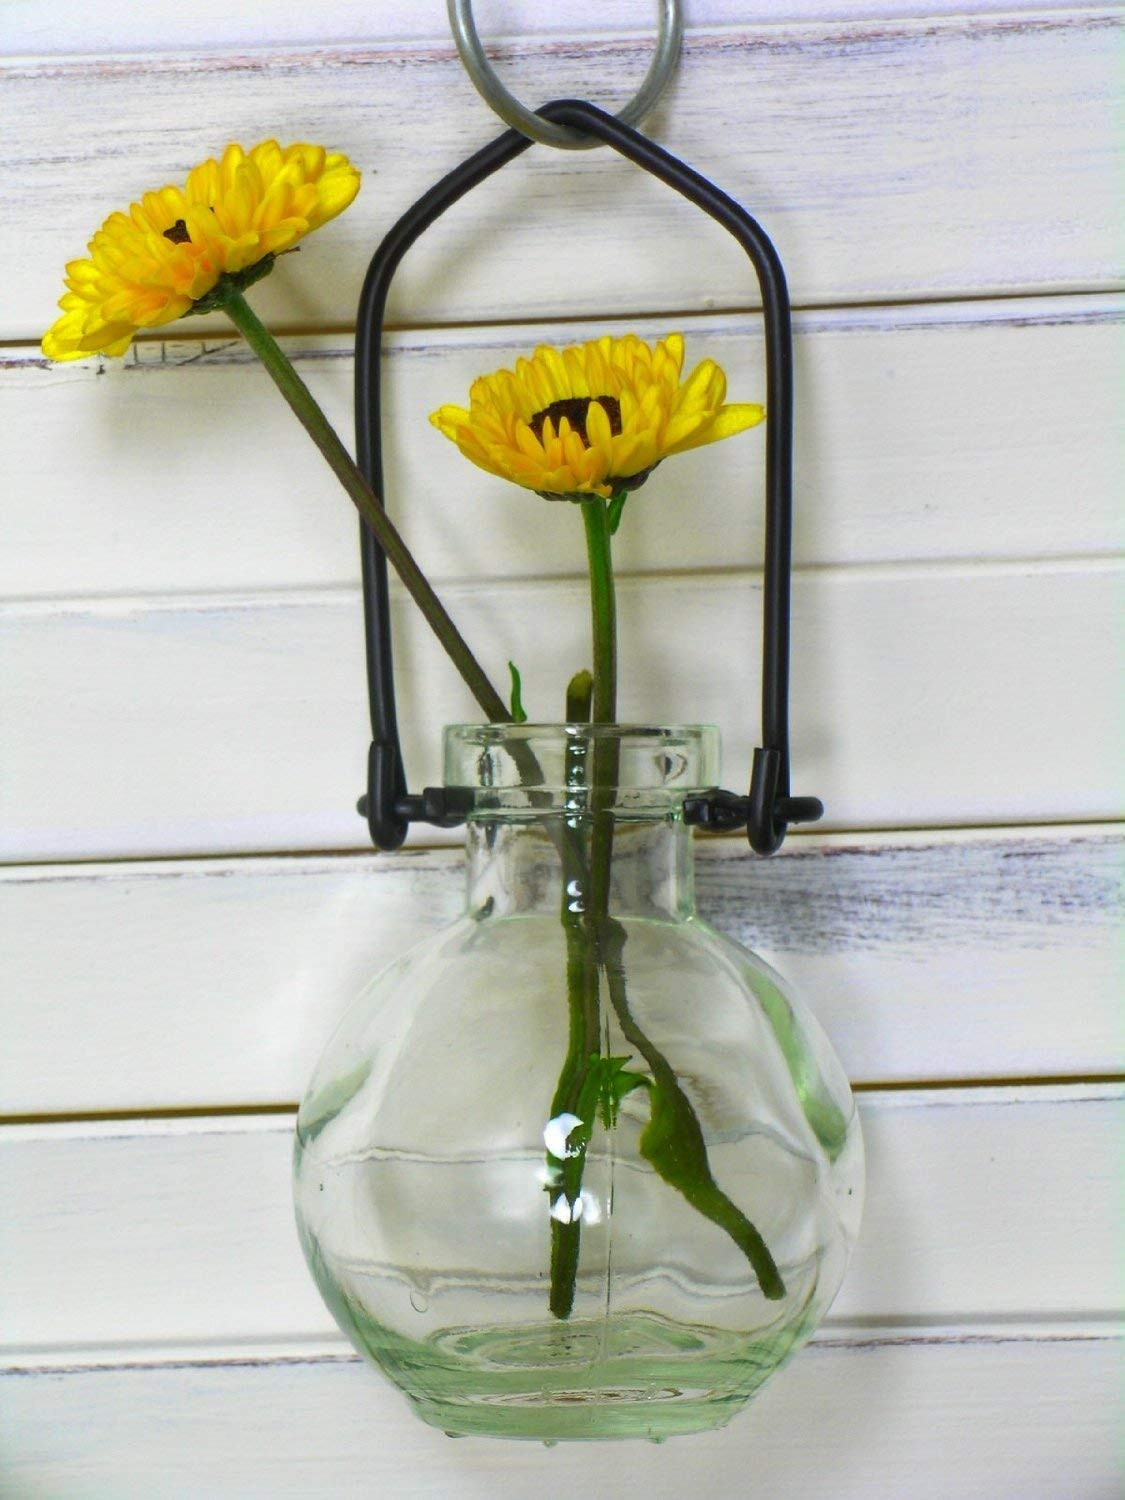 21 Unique Recycle Bottle Flower Vase 2024 free download recycle bottle flower vase of amazon com hanging flowers colored glass vase g70 clear 1 pc in amazon com hanging flowers colored glass vase g70 clear 1 pc colored glass bottle floral vase co